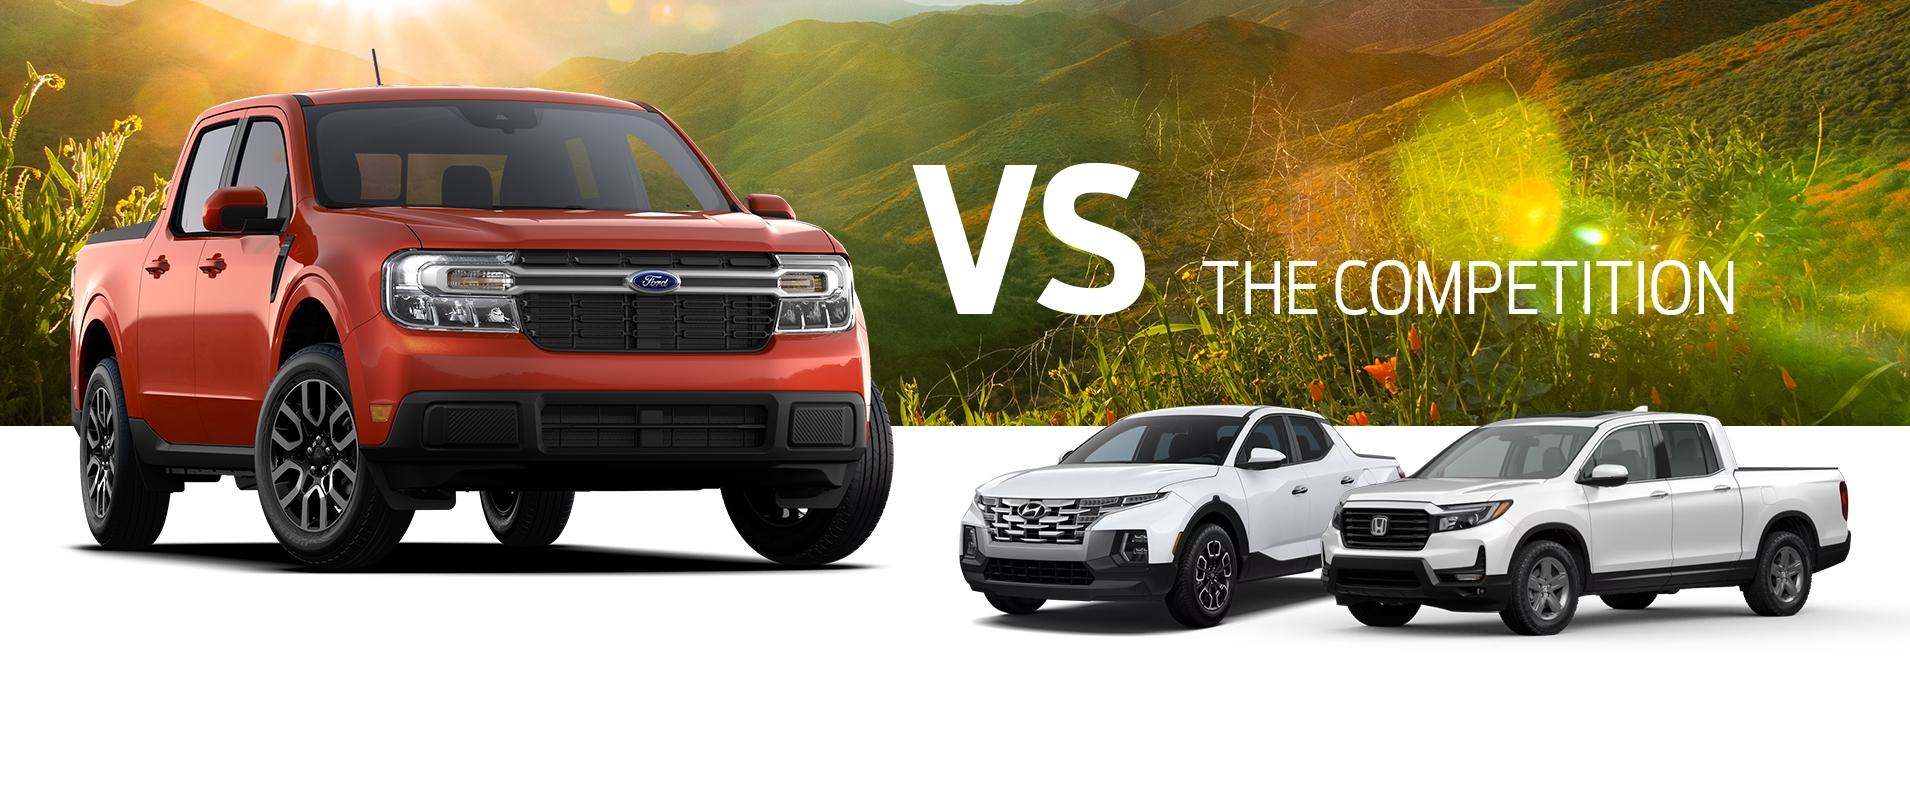 Ford Maverick vs Ranger: What's the Difference?